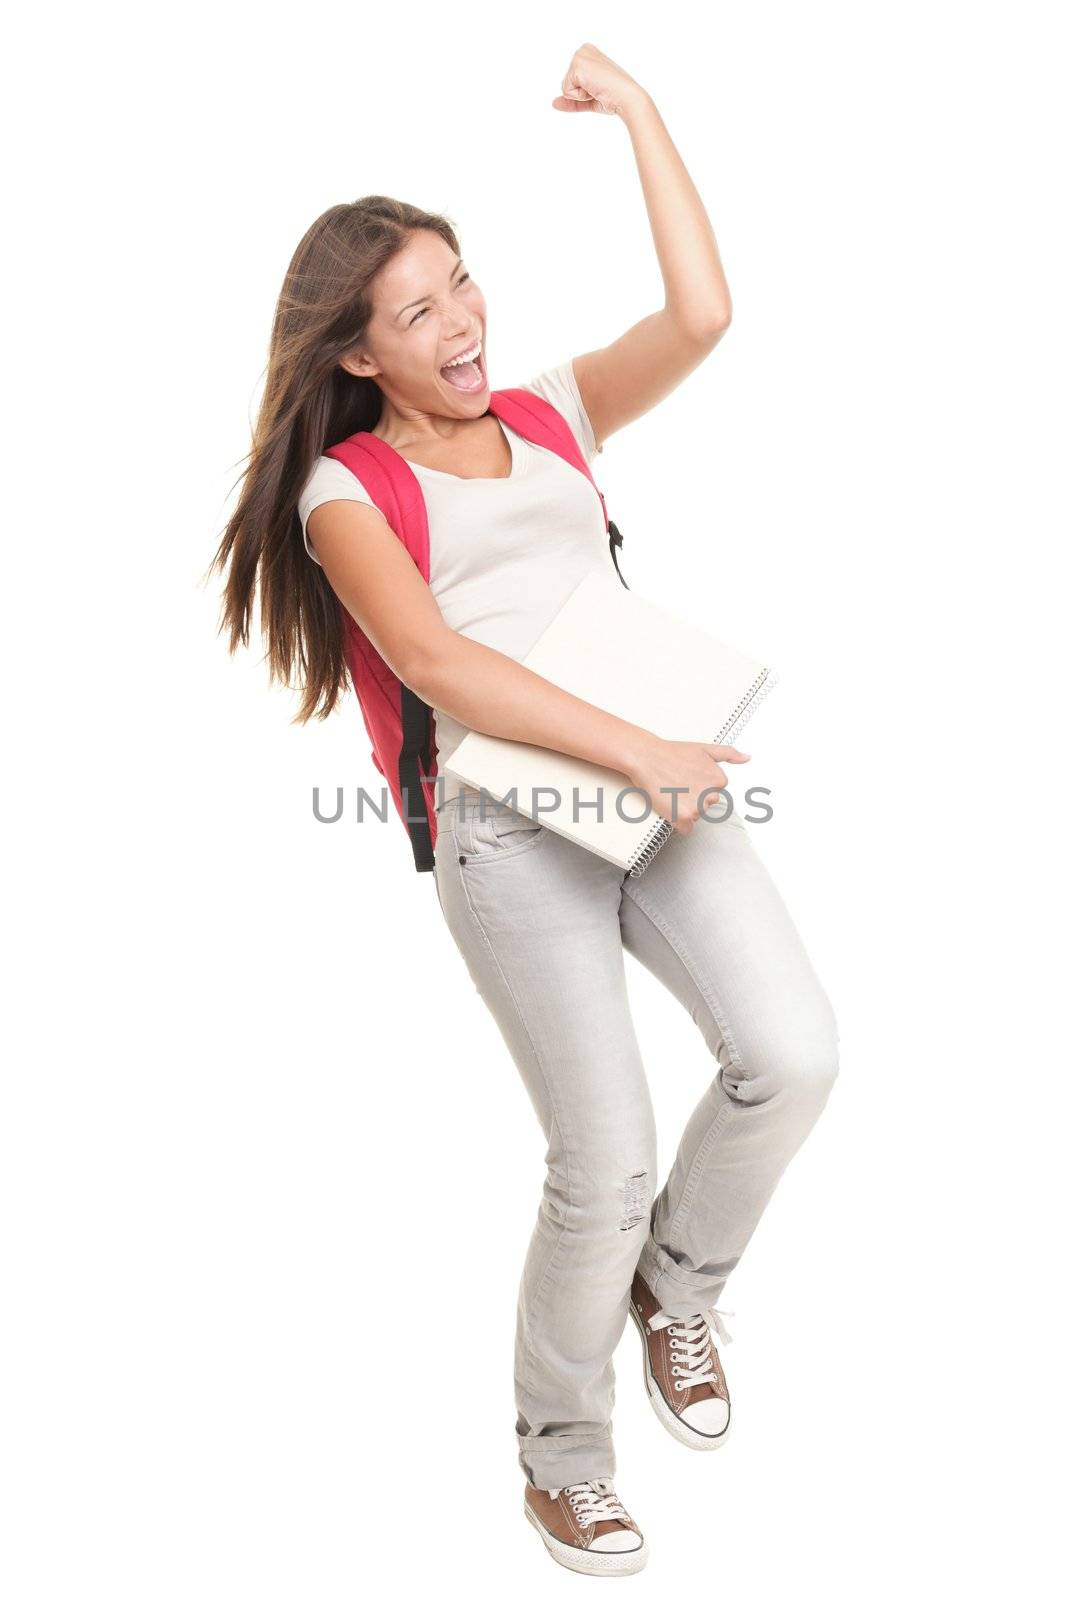 Happy woman college student winner celebrating isolated on white background in full length. Mixed race Chinese Asian / Caucasian female university student. 